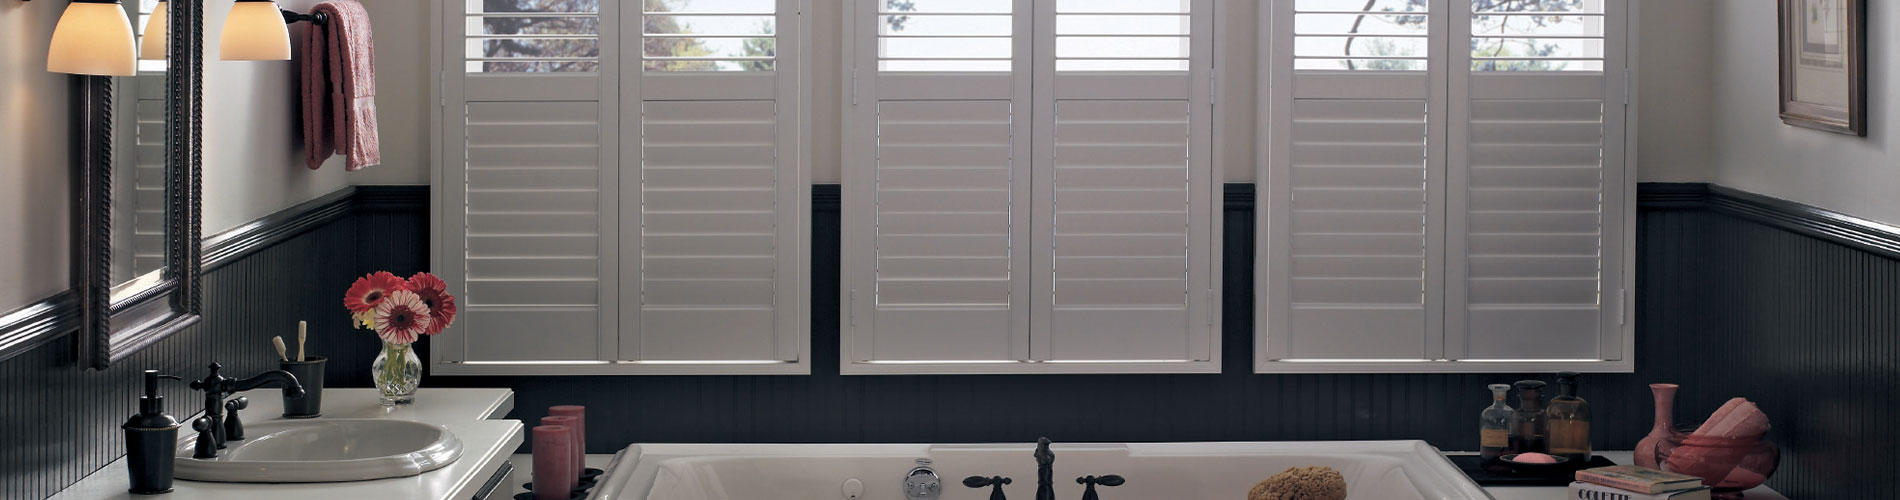 Composite Shutters are ideal for high moisture rooms such as bathrooms because of their durable polymer construction.